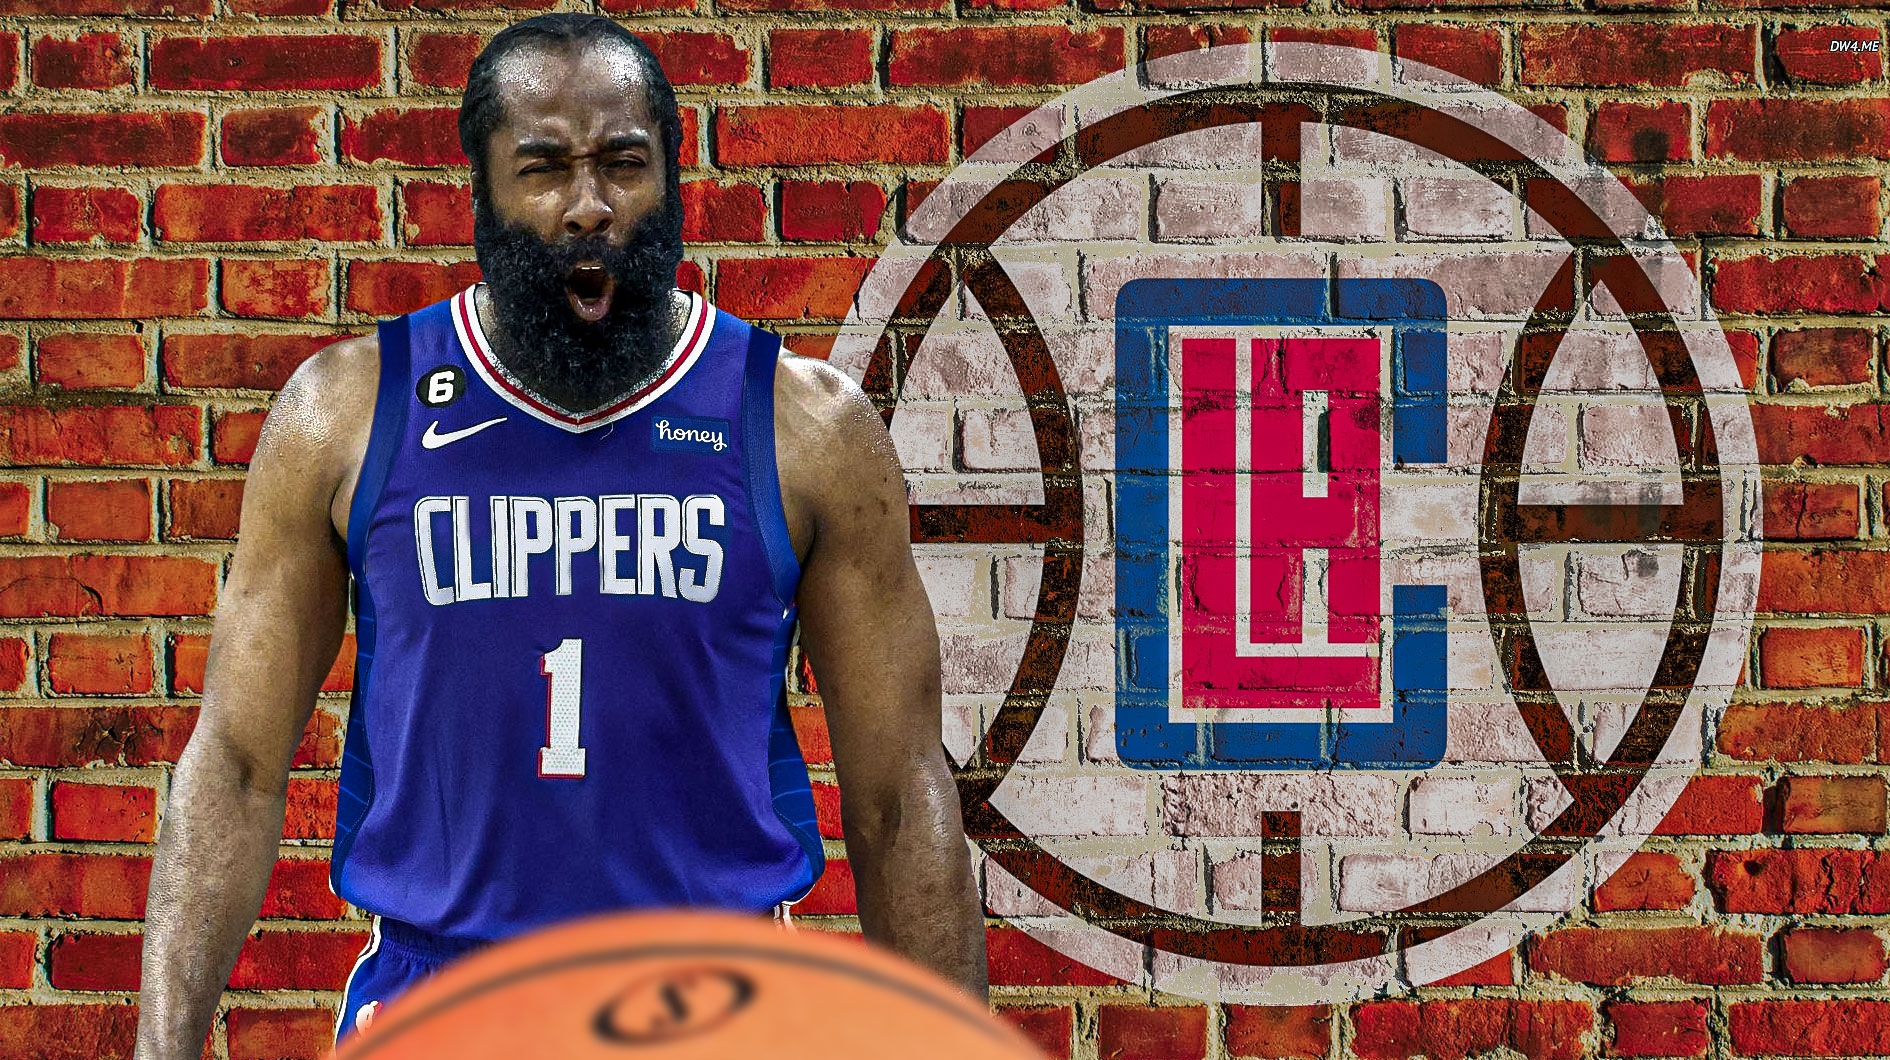 James Harden with a Clippers jersey after getting traded off of the Sixers